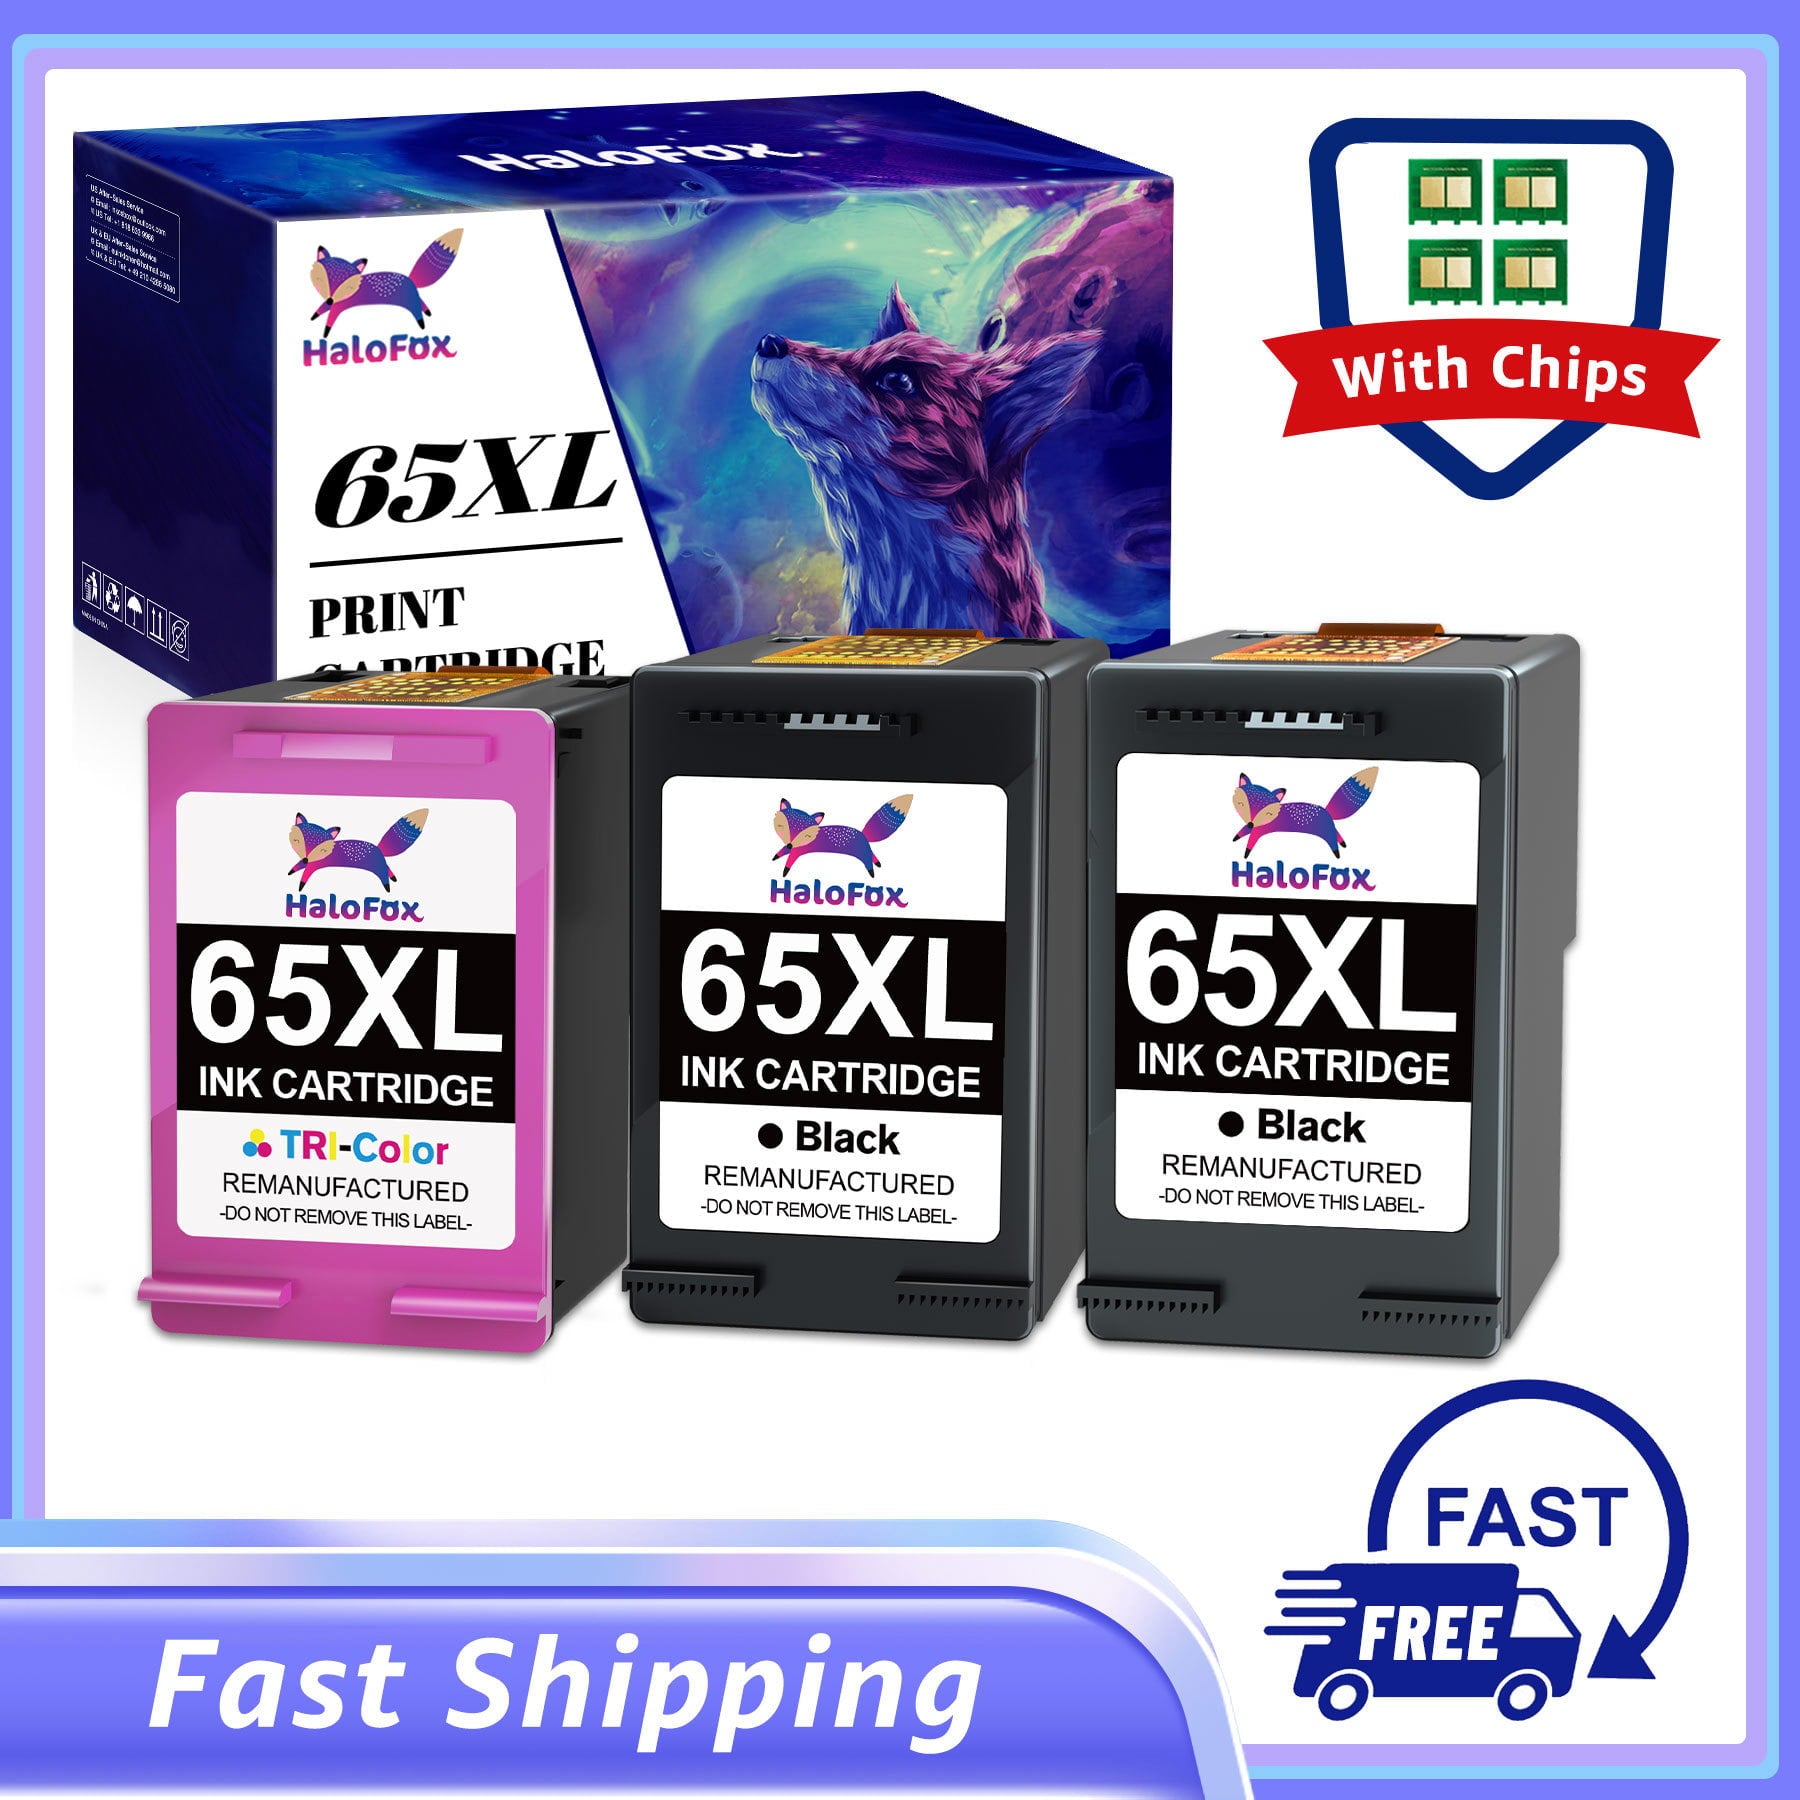 HaloFox Printer Ink 65XL Replacement for HP 65 Ink Cartridges (3 Pack)